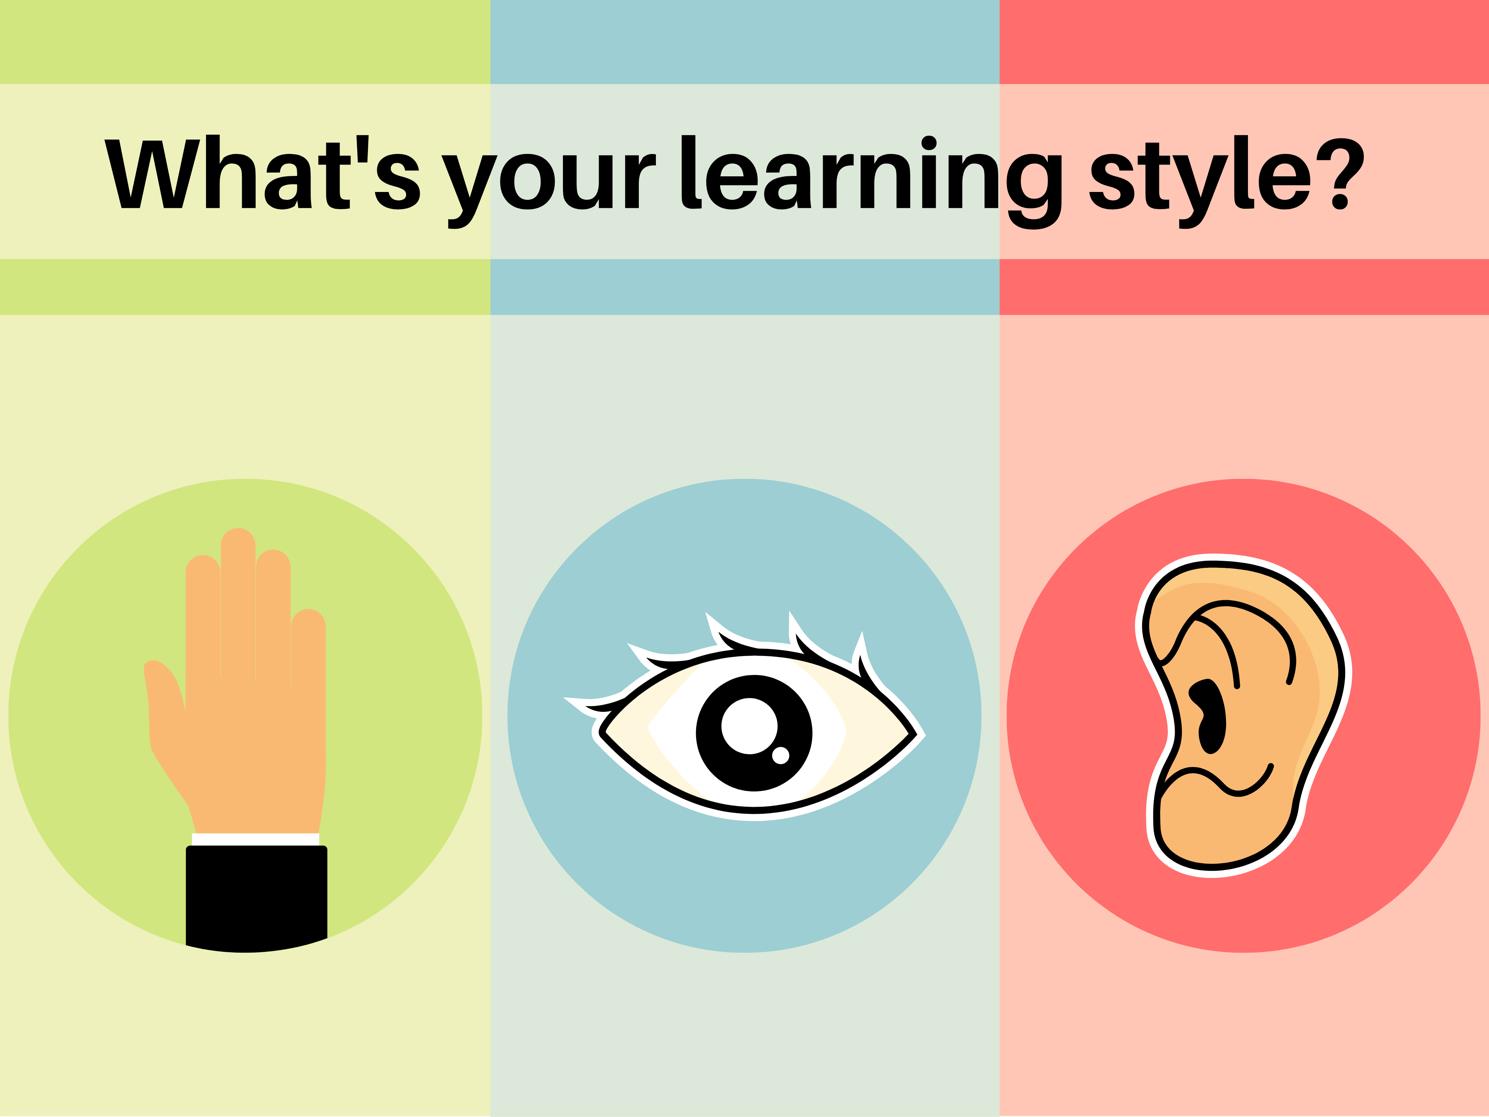 What’s Your Learning Style?